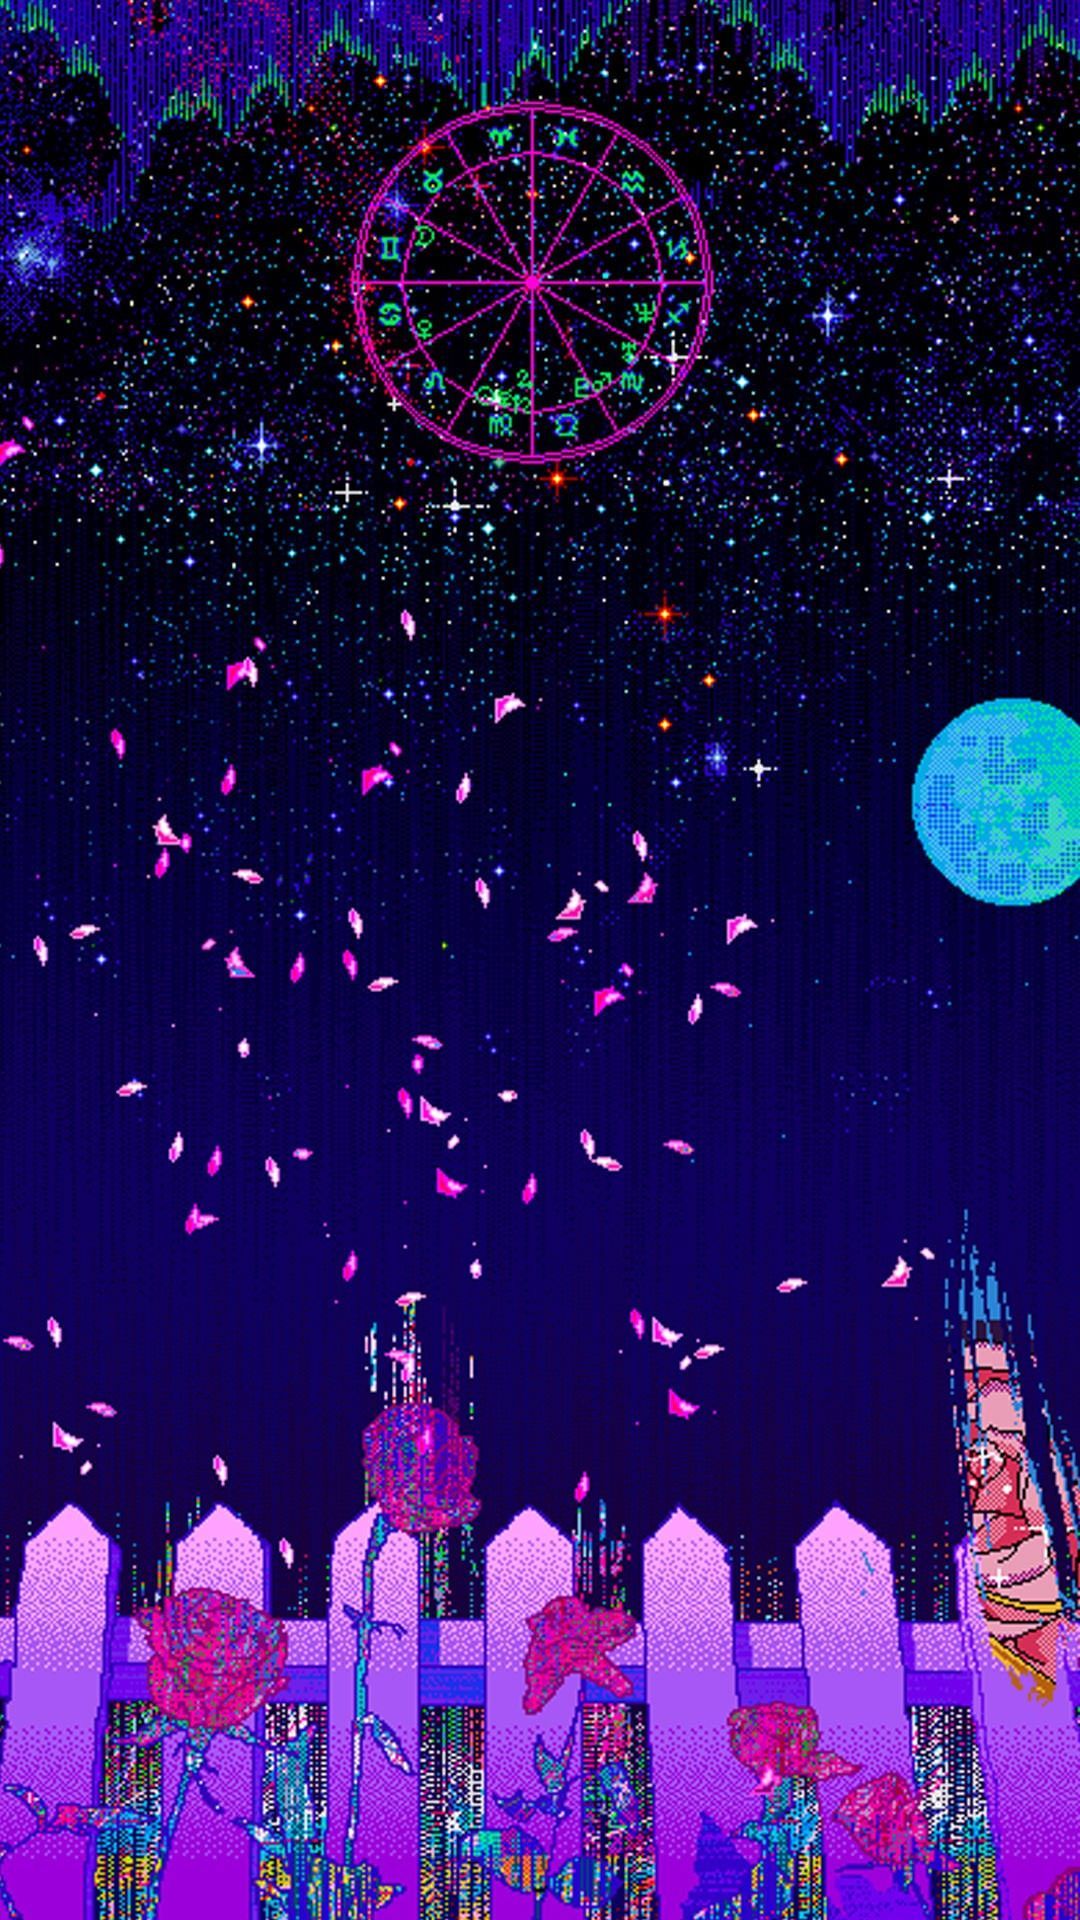 Aesthetic phone wallpaper with a purple castle, pink flowers, and a purple sky - Vaporwave